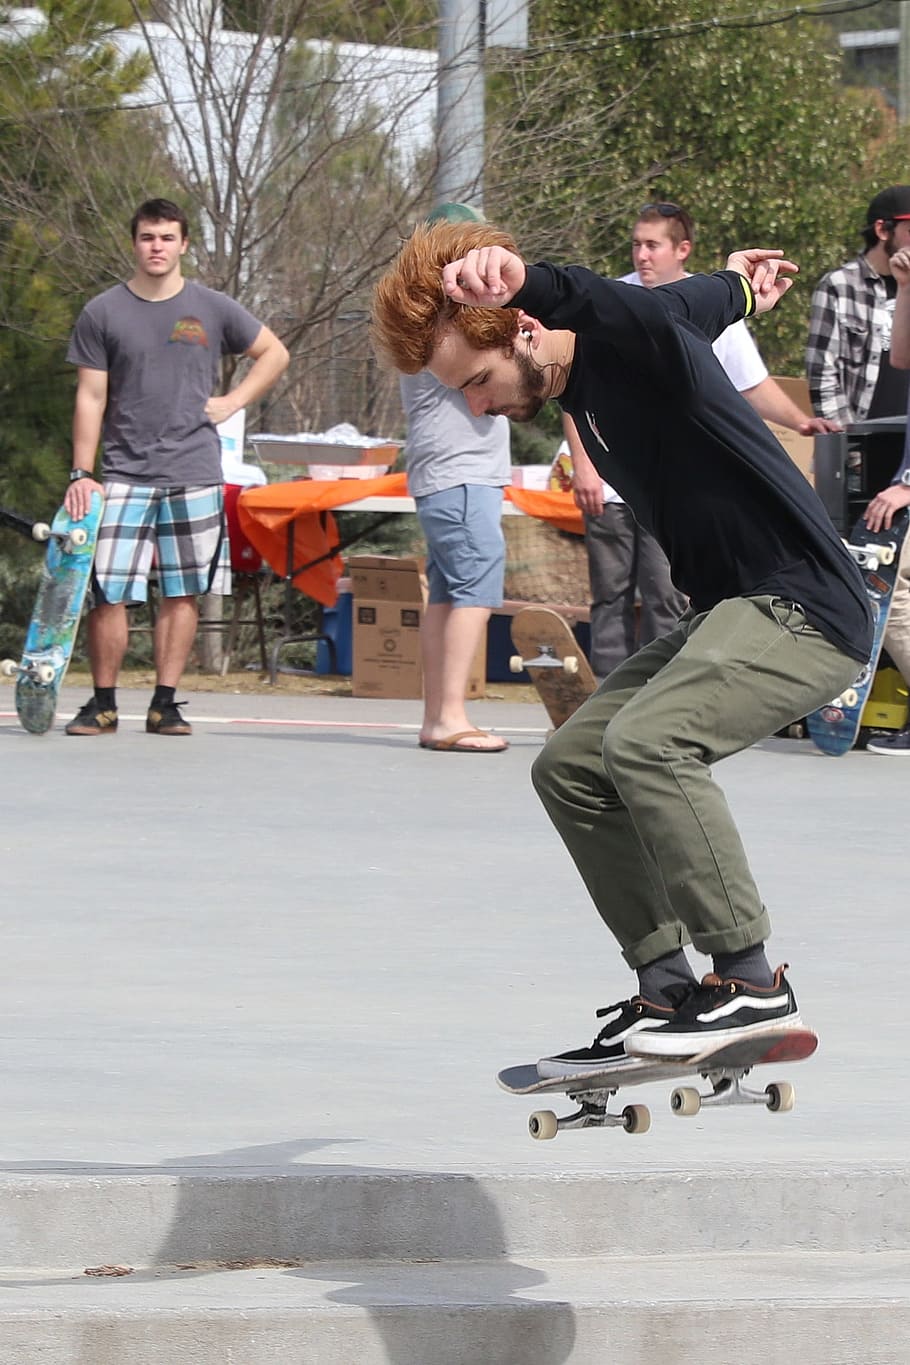 fun, skate, skateboard, action, sport, full length, men, leisure activity, group of people, casual clothing